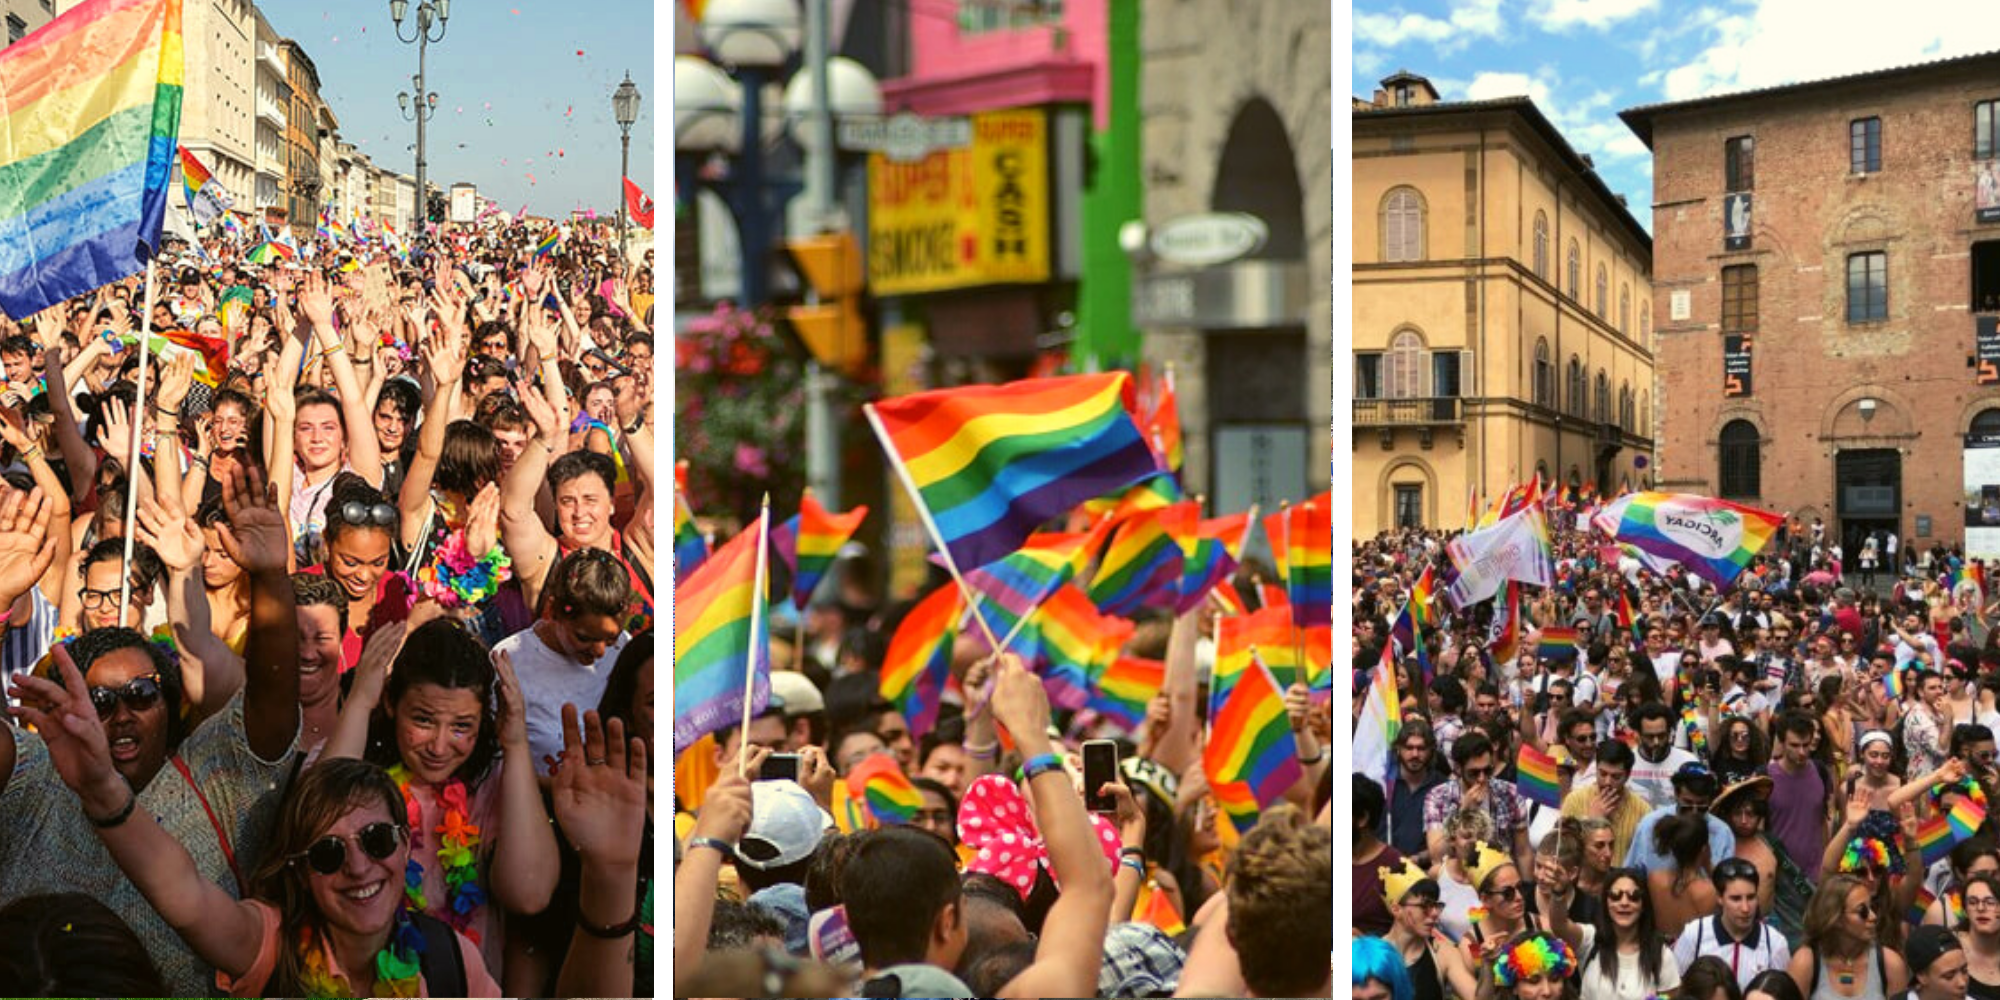 LGBTQ+ Toscana Pride event in Florence, Italy.